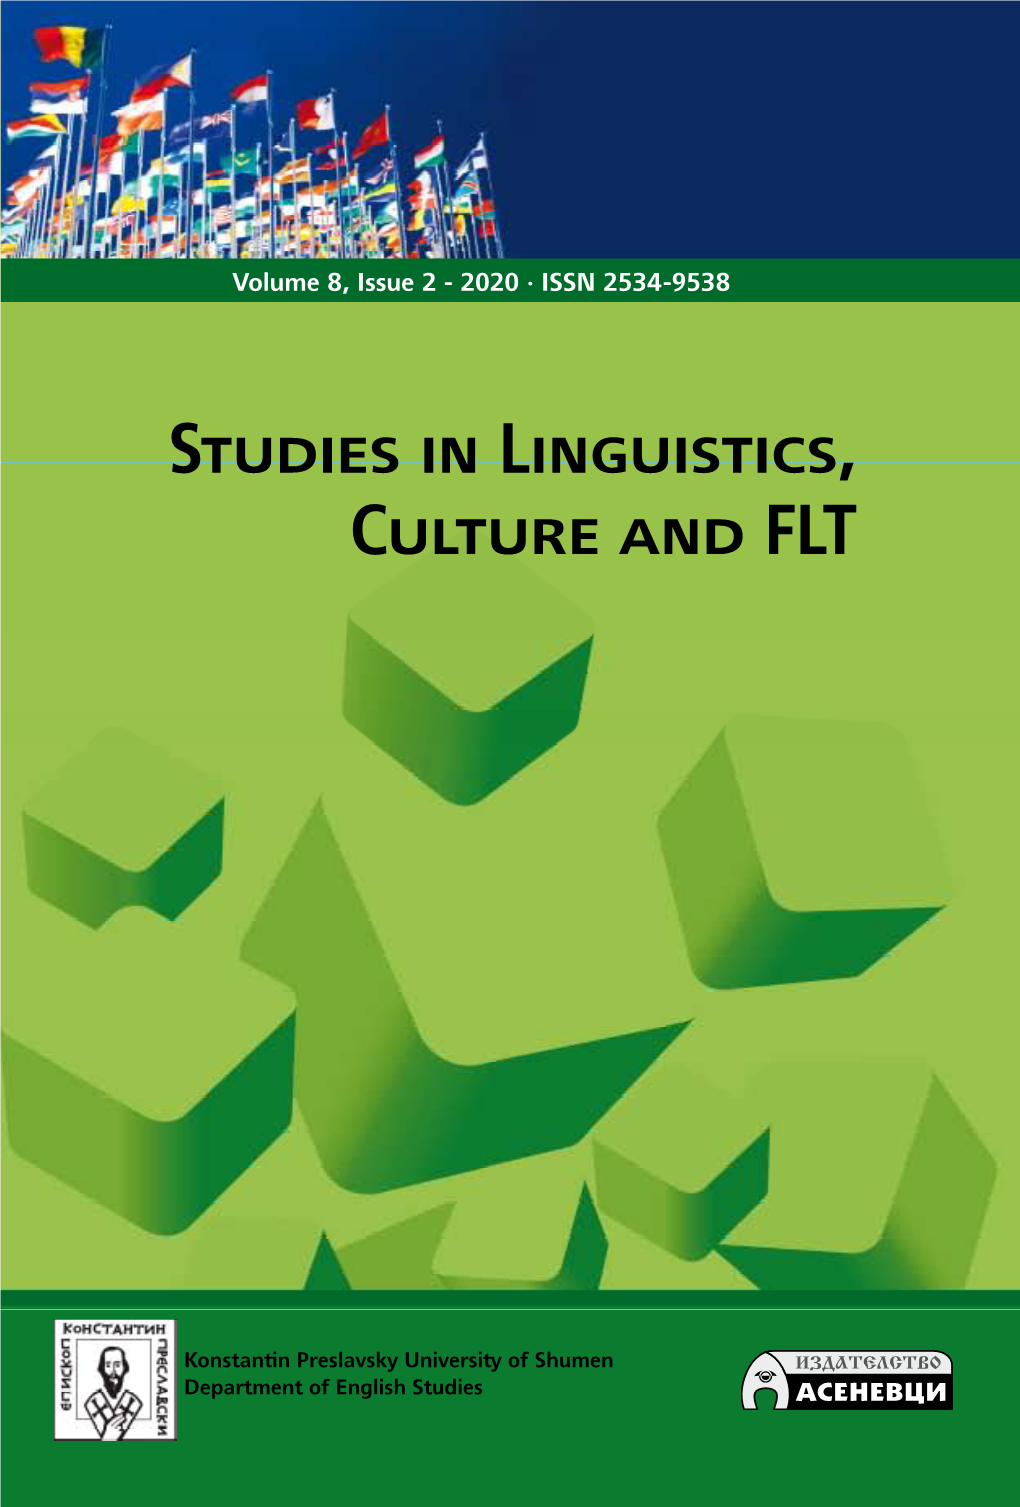 Exploring English Studies: Aspects of Language, Culture and the Media